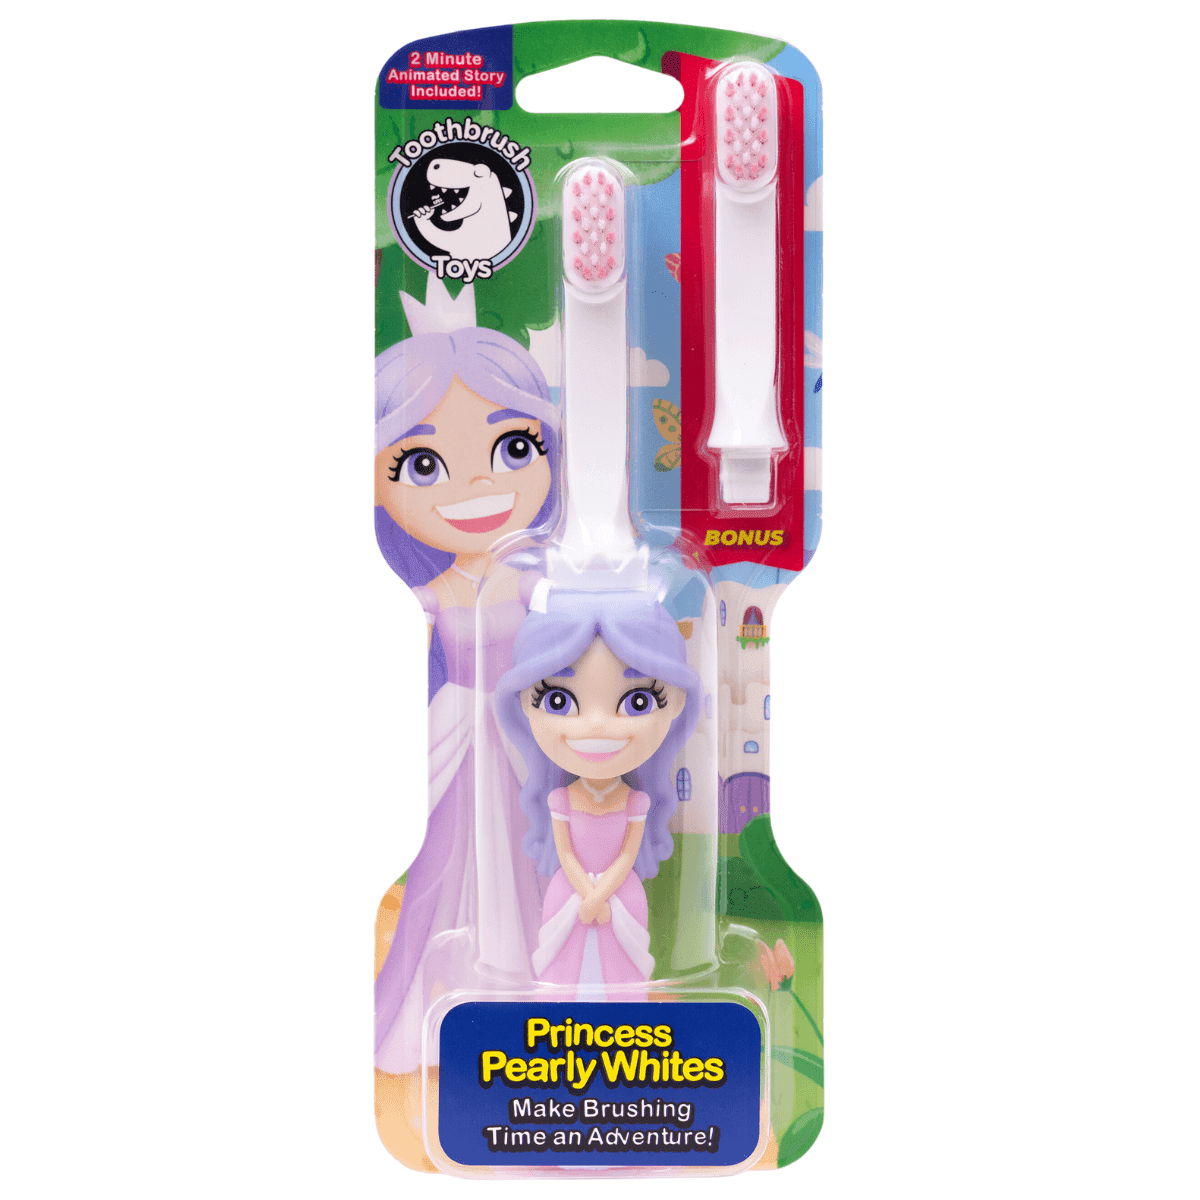 Princess Pearly Whites toothbrush in the original packaging